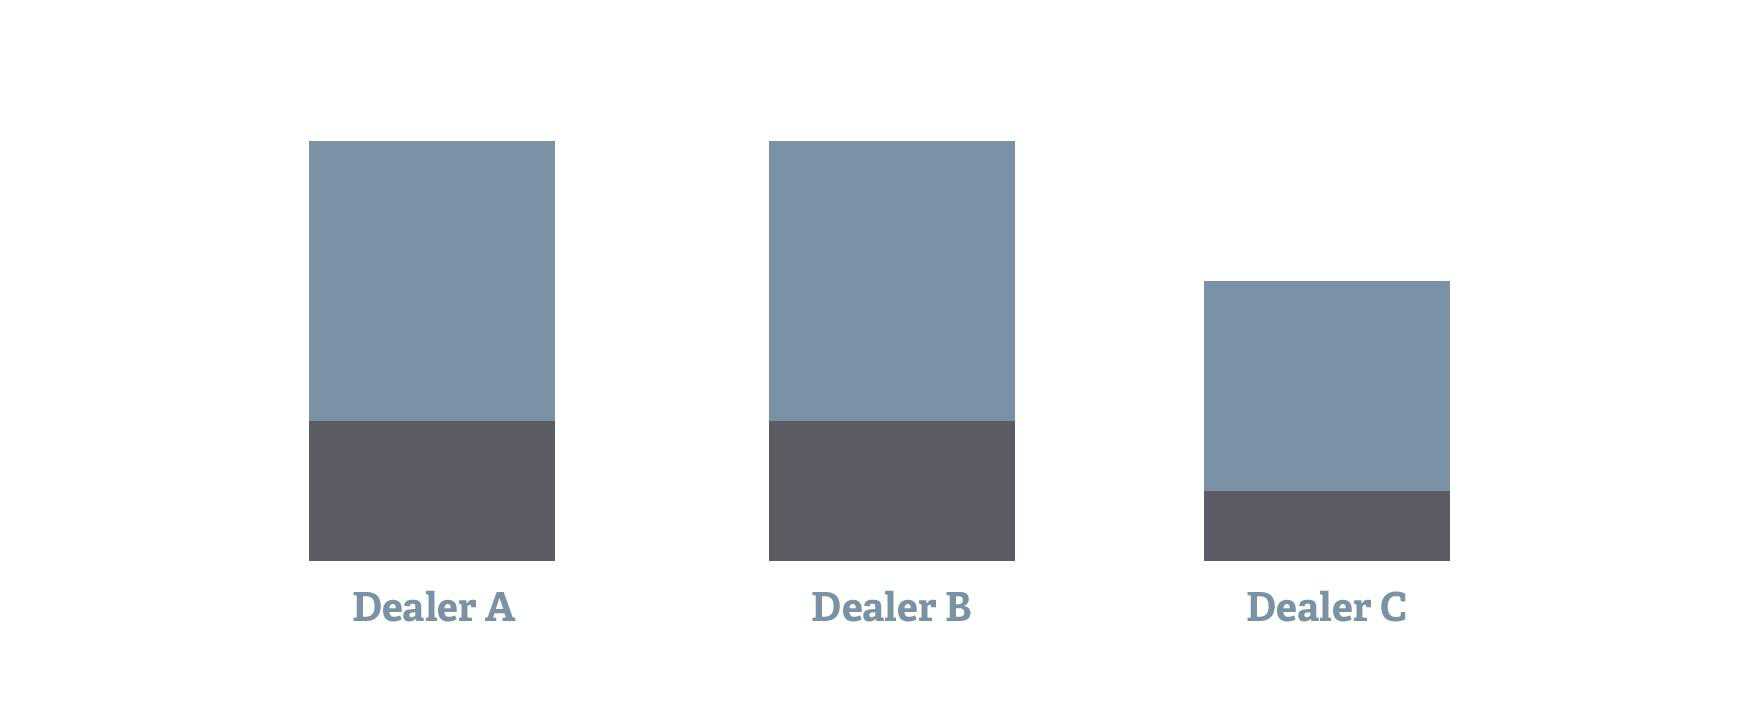 Three grey and blue bar graphs that represent online performance score of Dealer A, B and C.